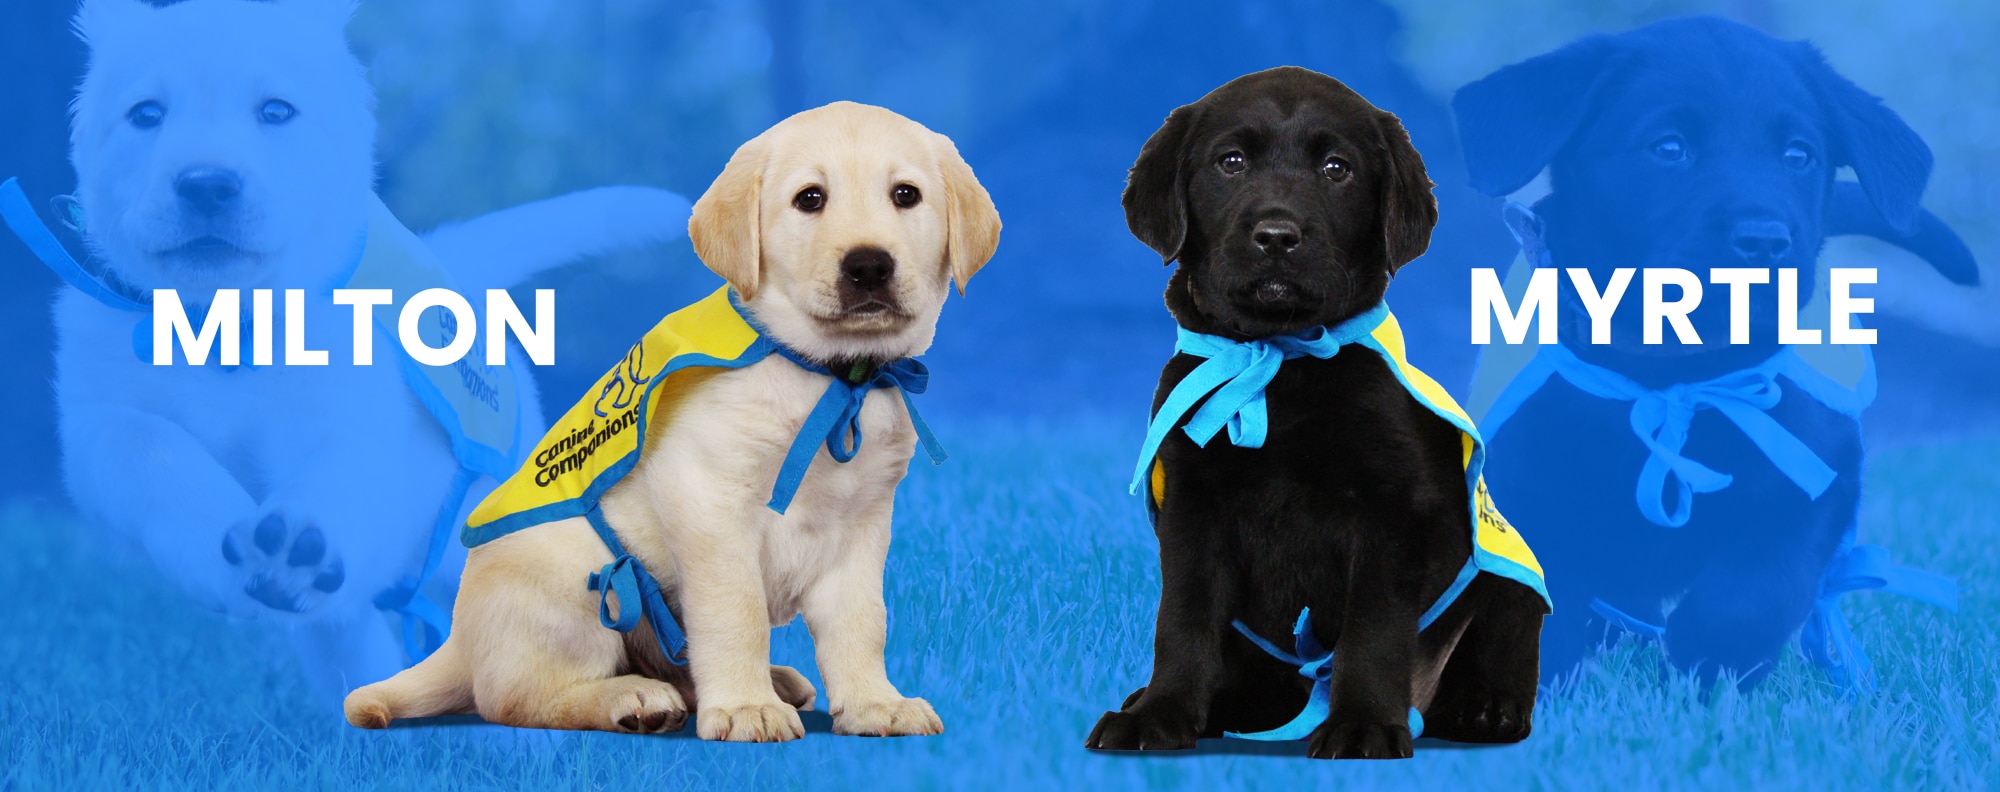 Two lab puppies on a blue background wearing yellow canine companions puppy capes with the names Milton and Myrtle next to them